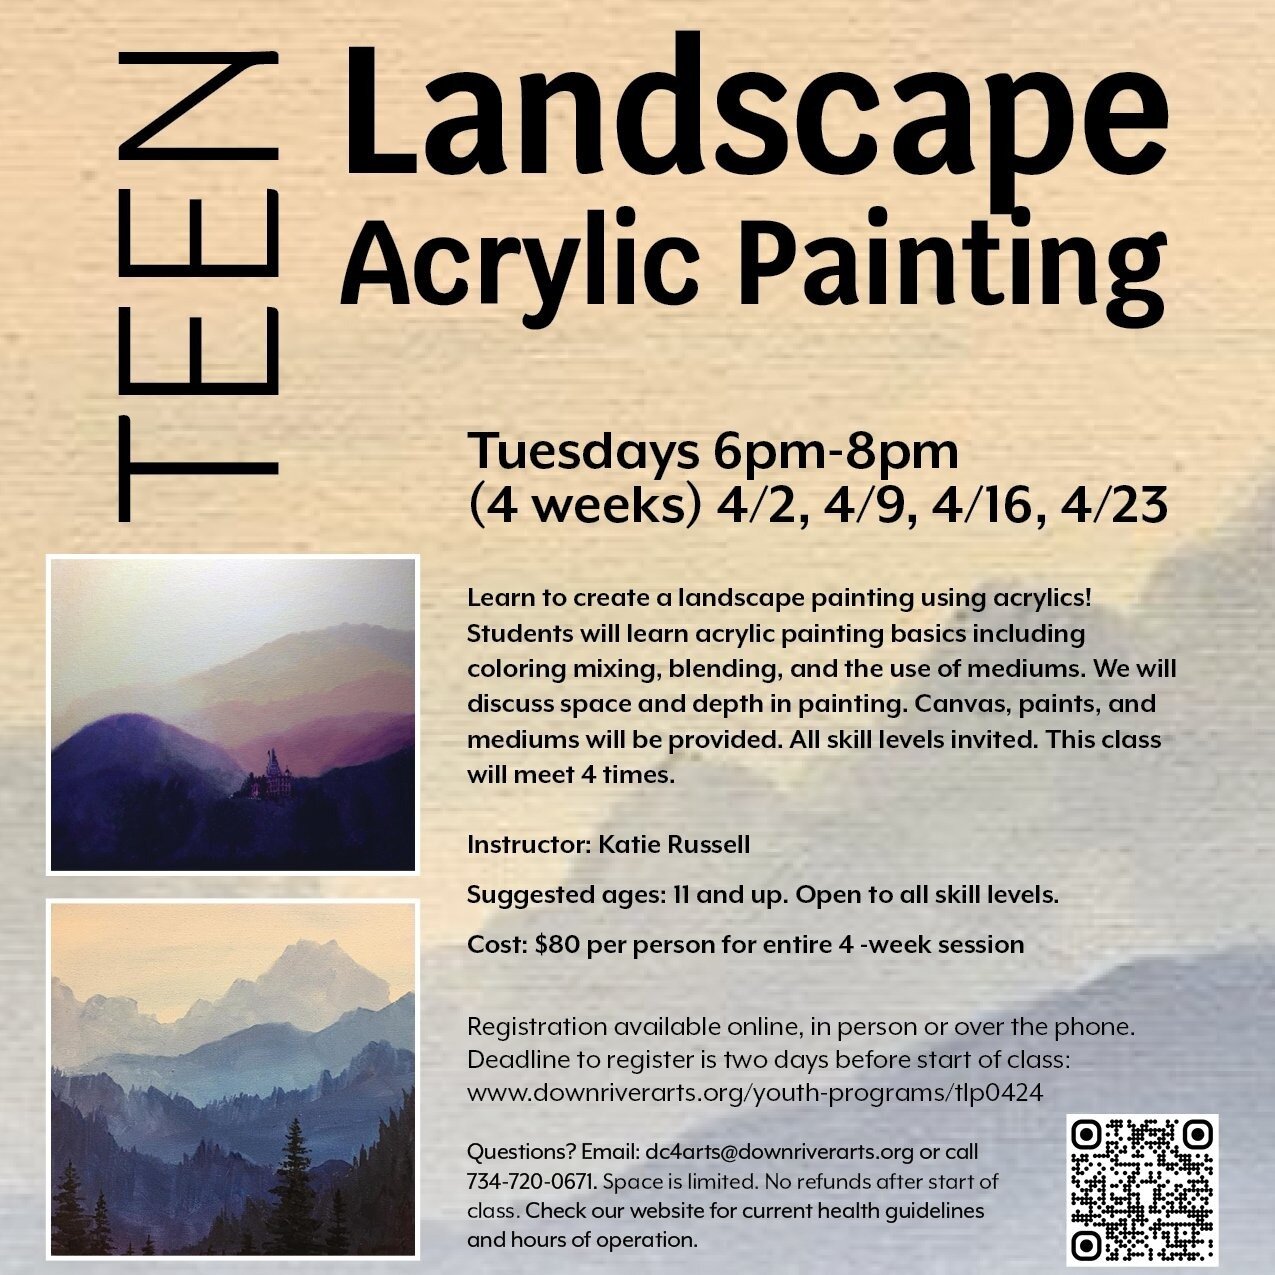 Learn to create a landscape painting using acrylics! The focus will be on acrylic painting basics such as color mixing, blending, and the use of mediums to create space and depth in your paintings. All necessary materials, including canvas, paints, a